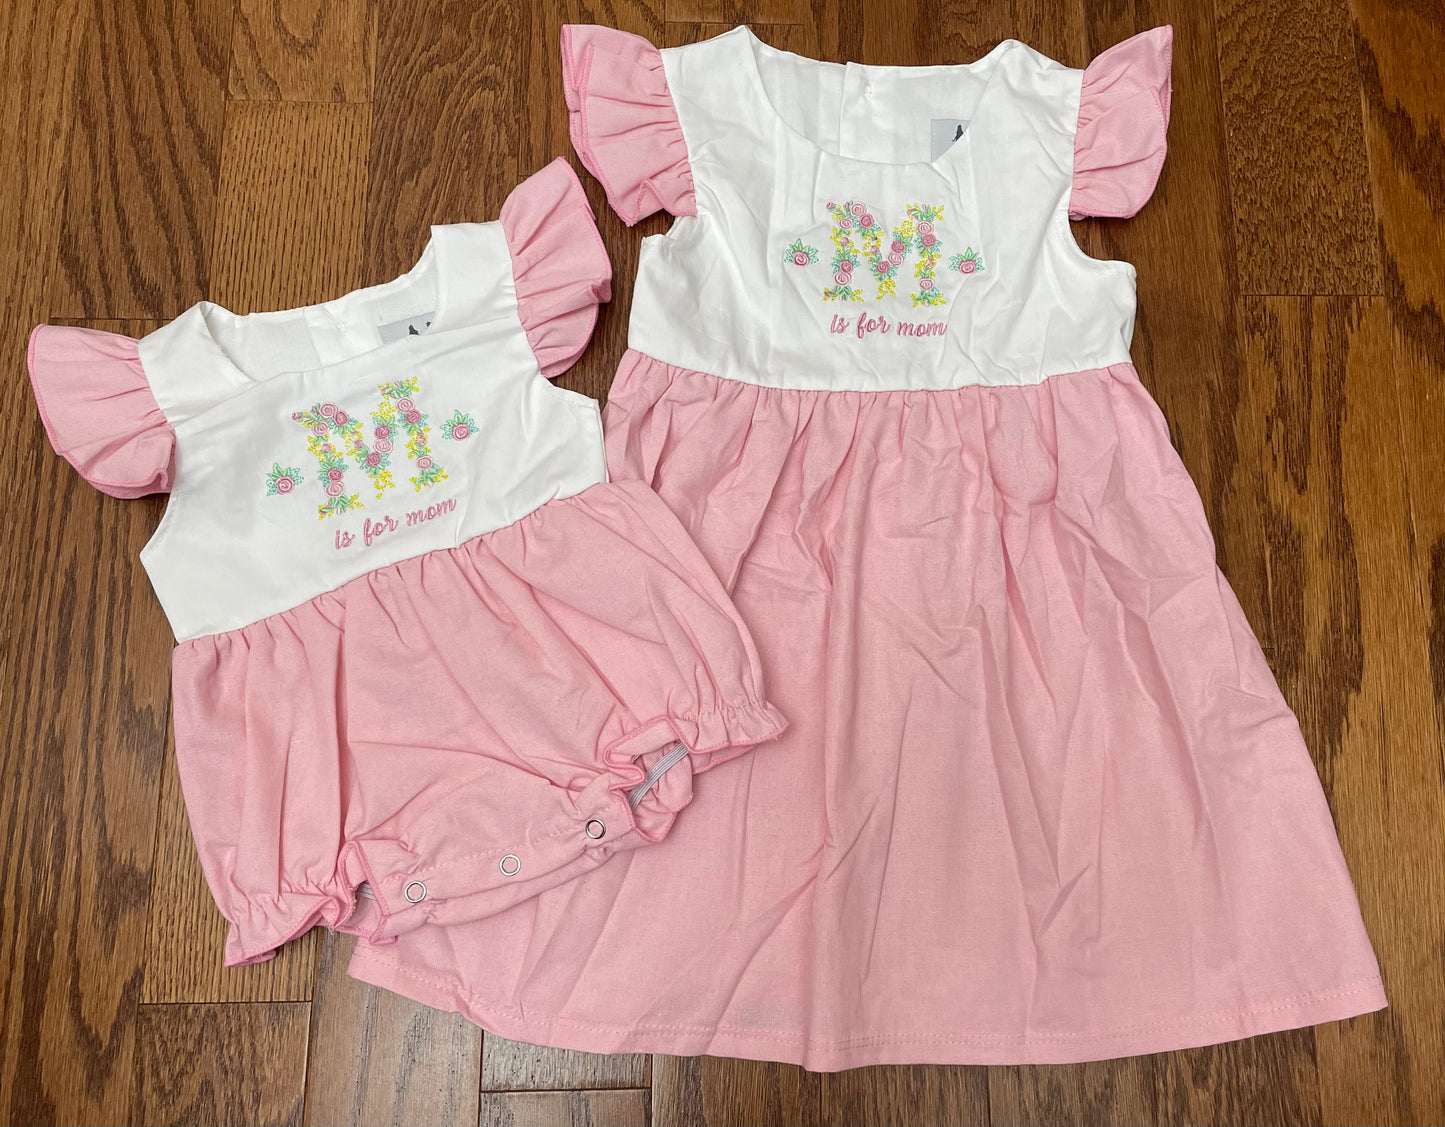 M is for Mom Dress